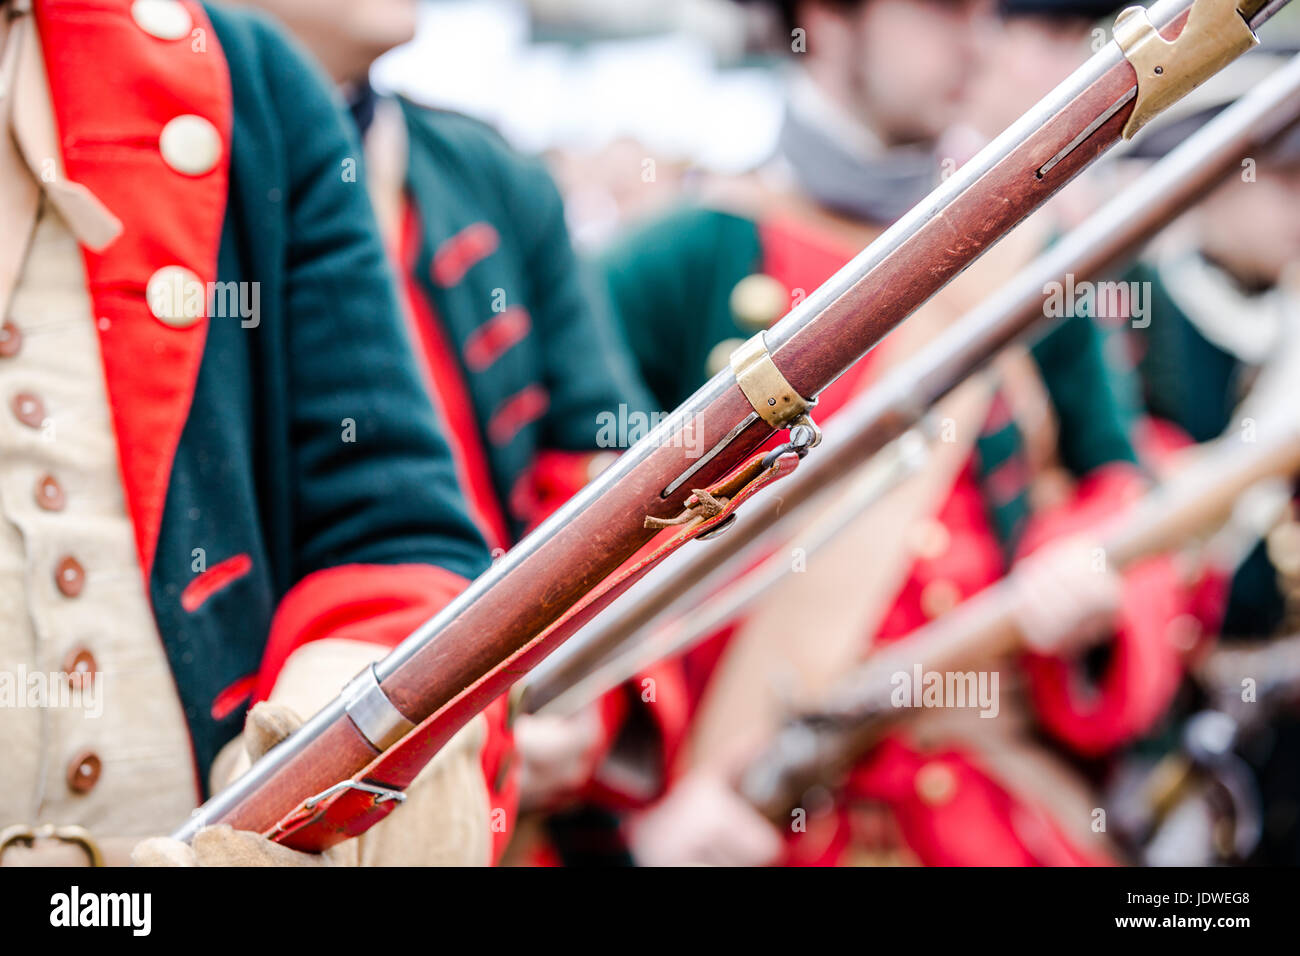 Building musketeers with guns. Focus on gun Stock Photo